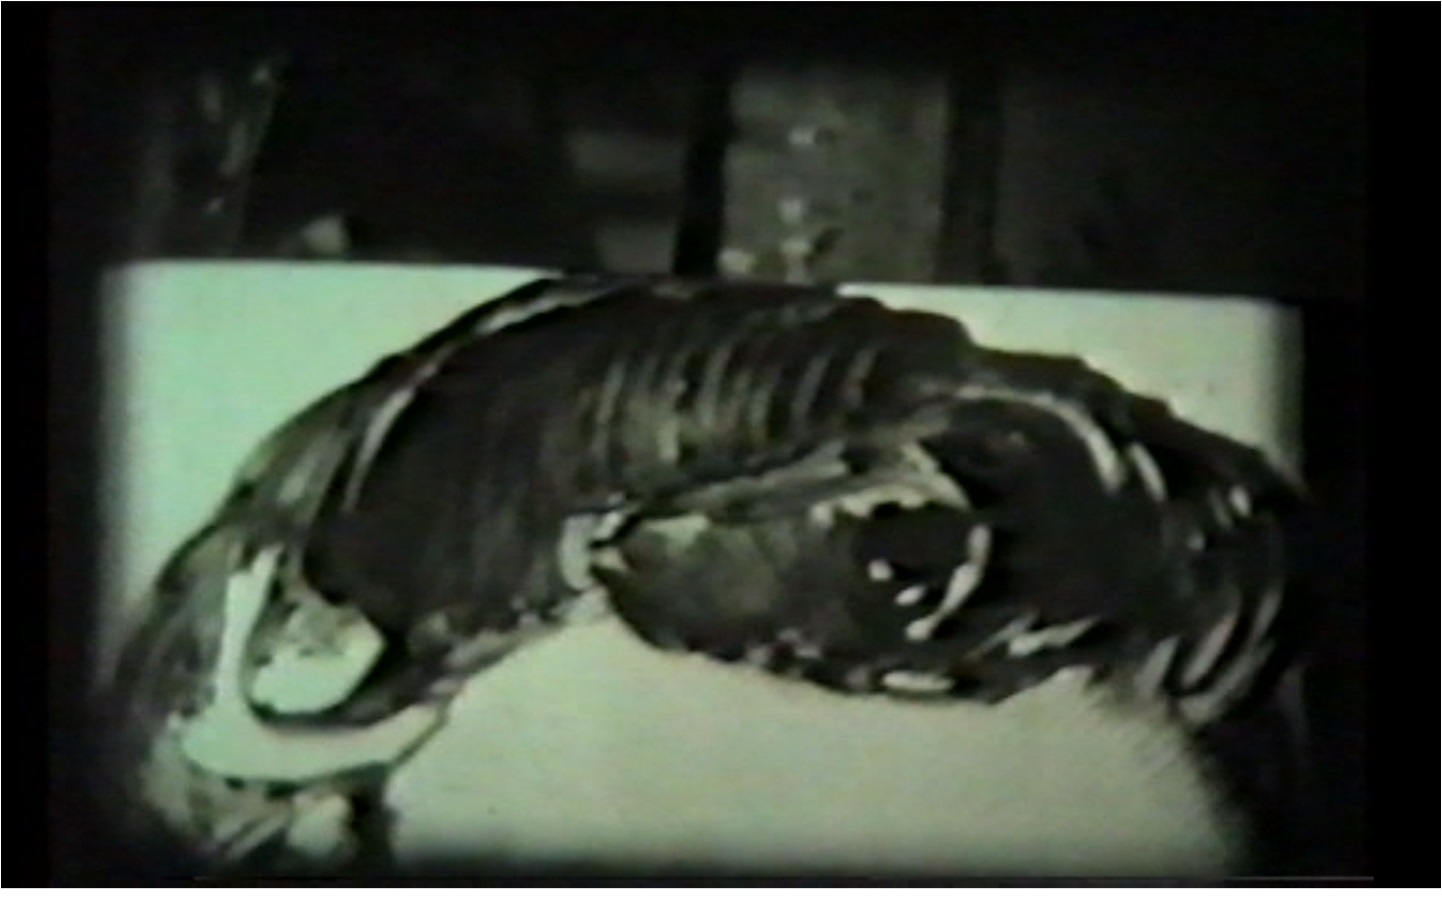 Ion Grigorescu, "Dialogue with President Ceausescu," standard 8mm film, b/w, no sound, 1978. Image courtesy of the author. 